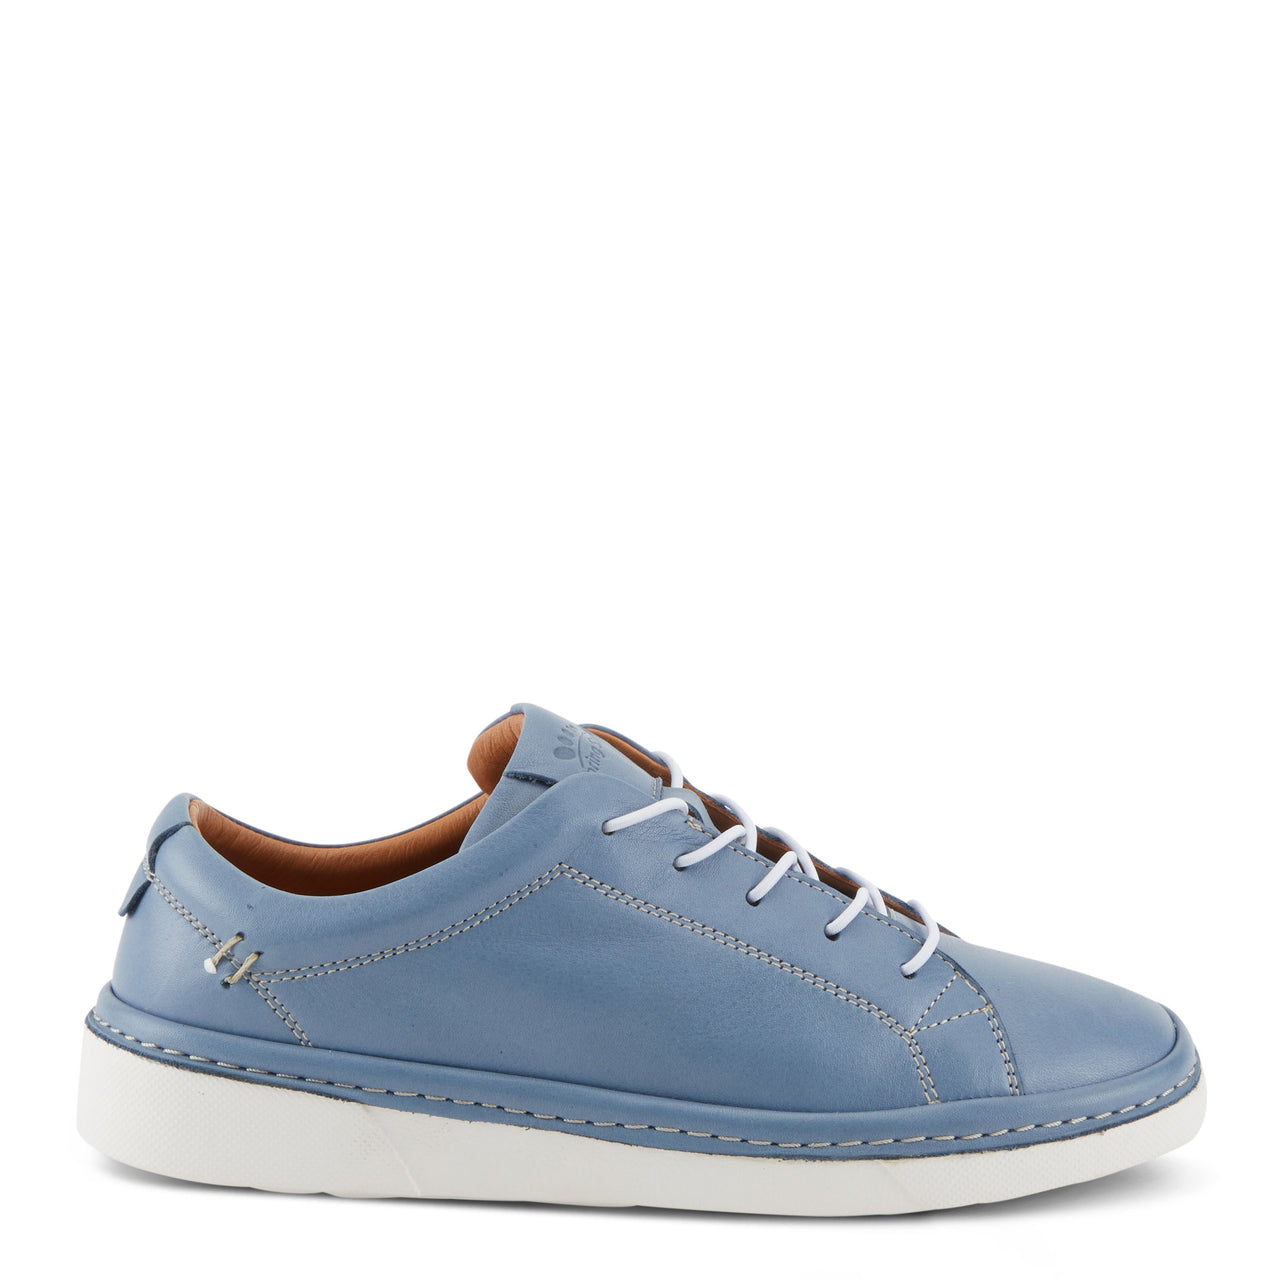 Spring Step Picasa Sneakers featuring padded collar for extra comfort